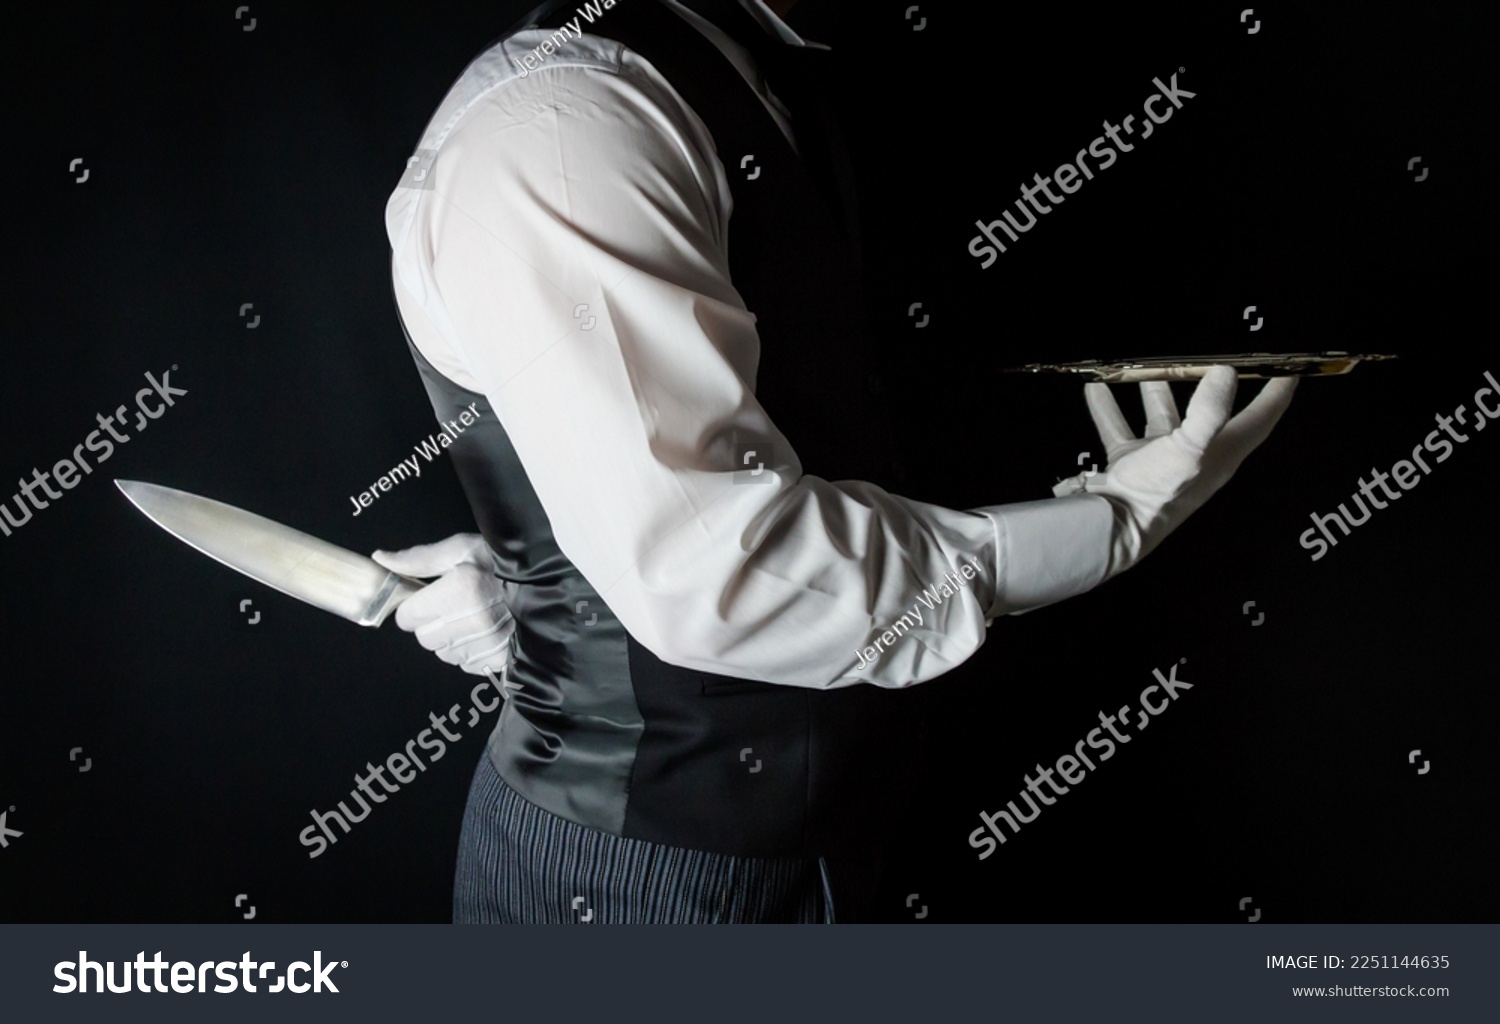 Butler or Waiter With Serving Tray and Holding Sharp Knife Behind Back. Concept of Butler Did It. Classic Murder Mystery. #2251144635